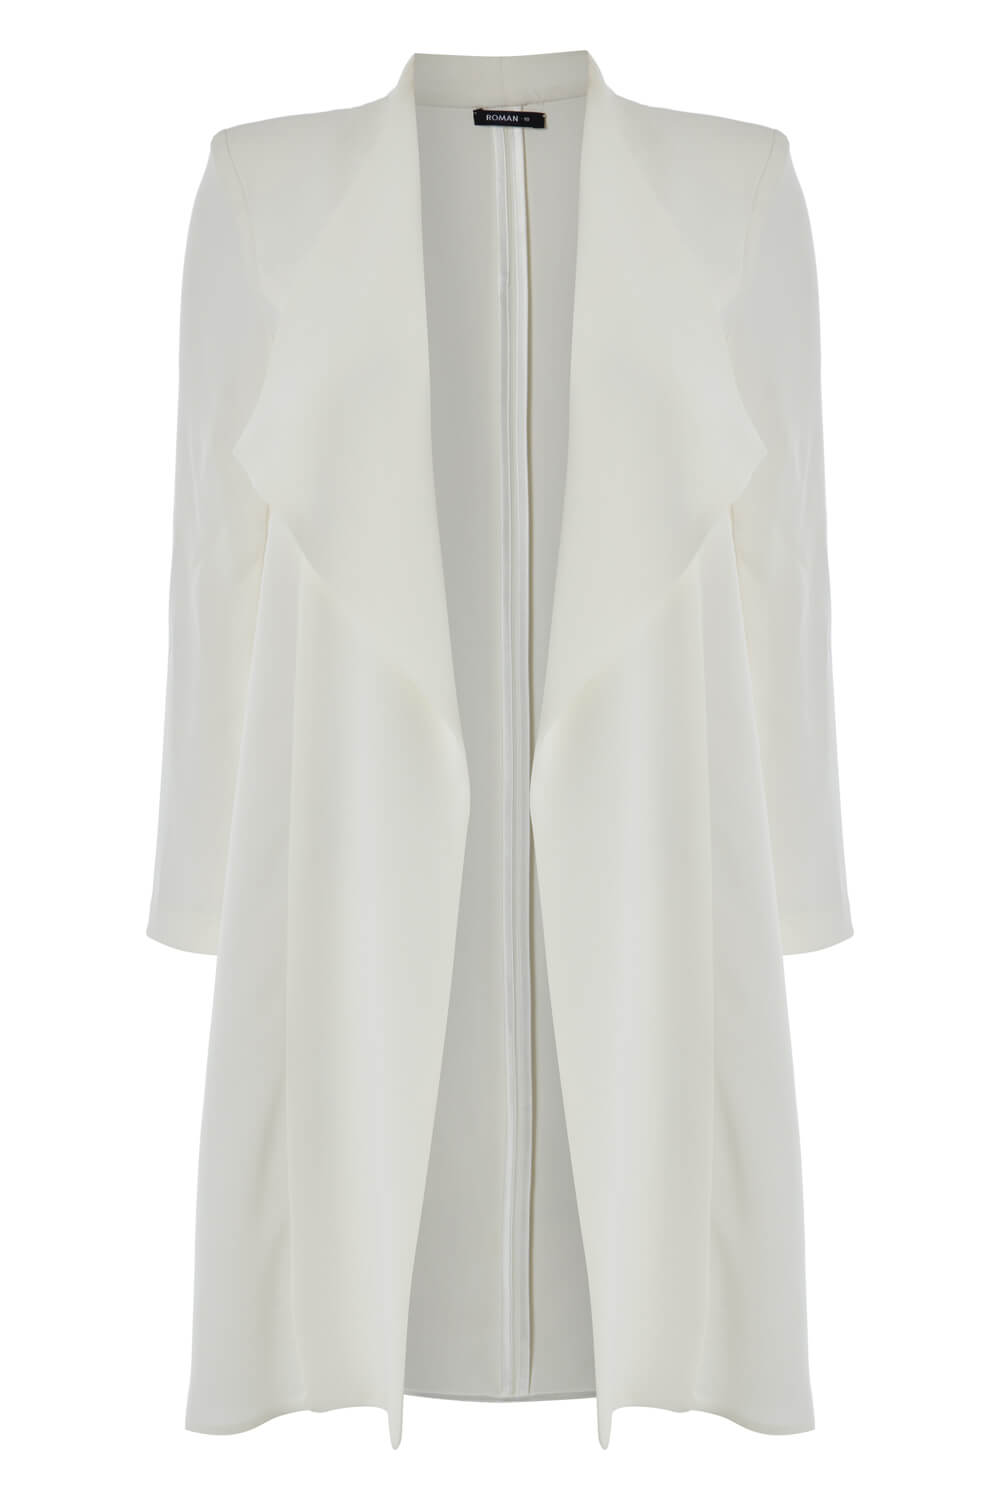 Womens J.ING Coats & Jackets  Melodie Ivory Longline Duster ⋆ Votefredtovar